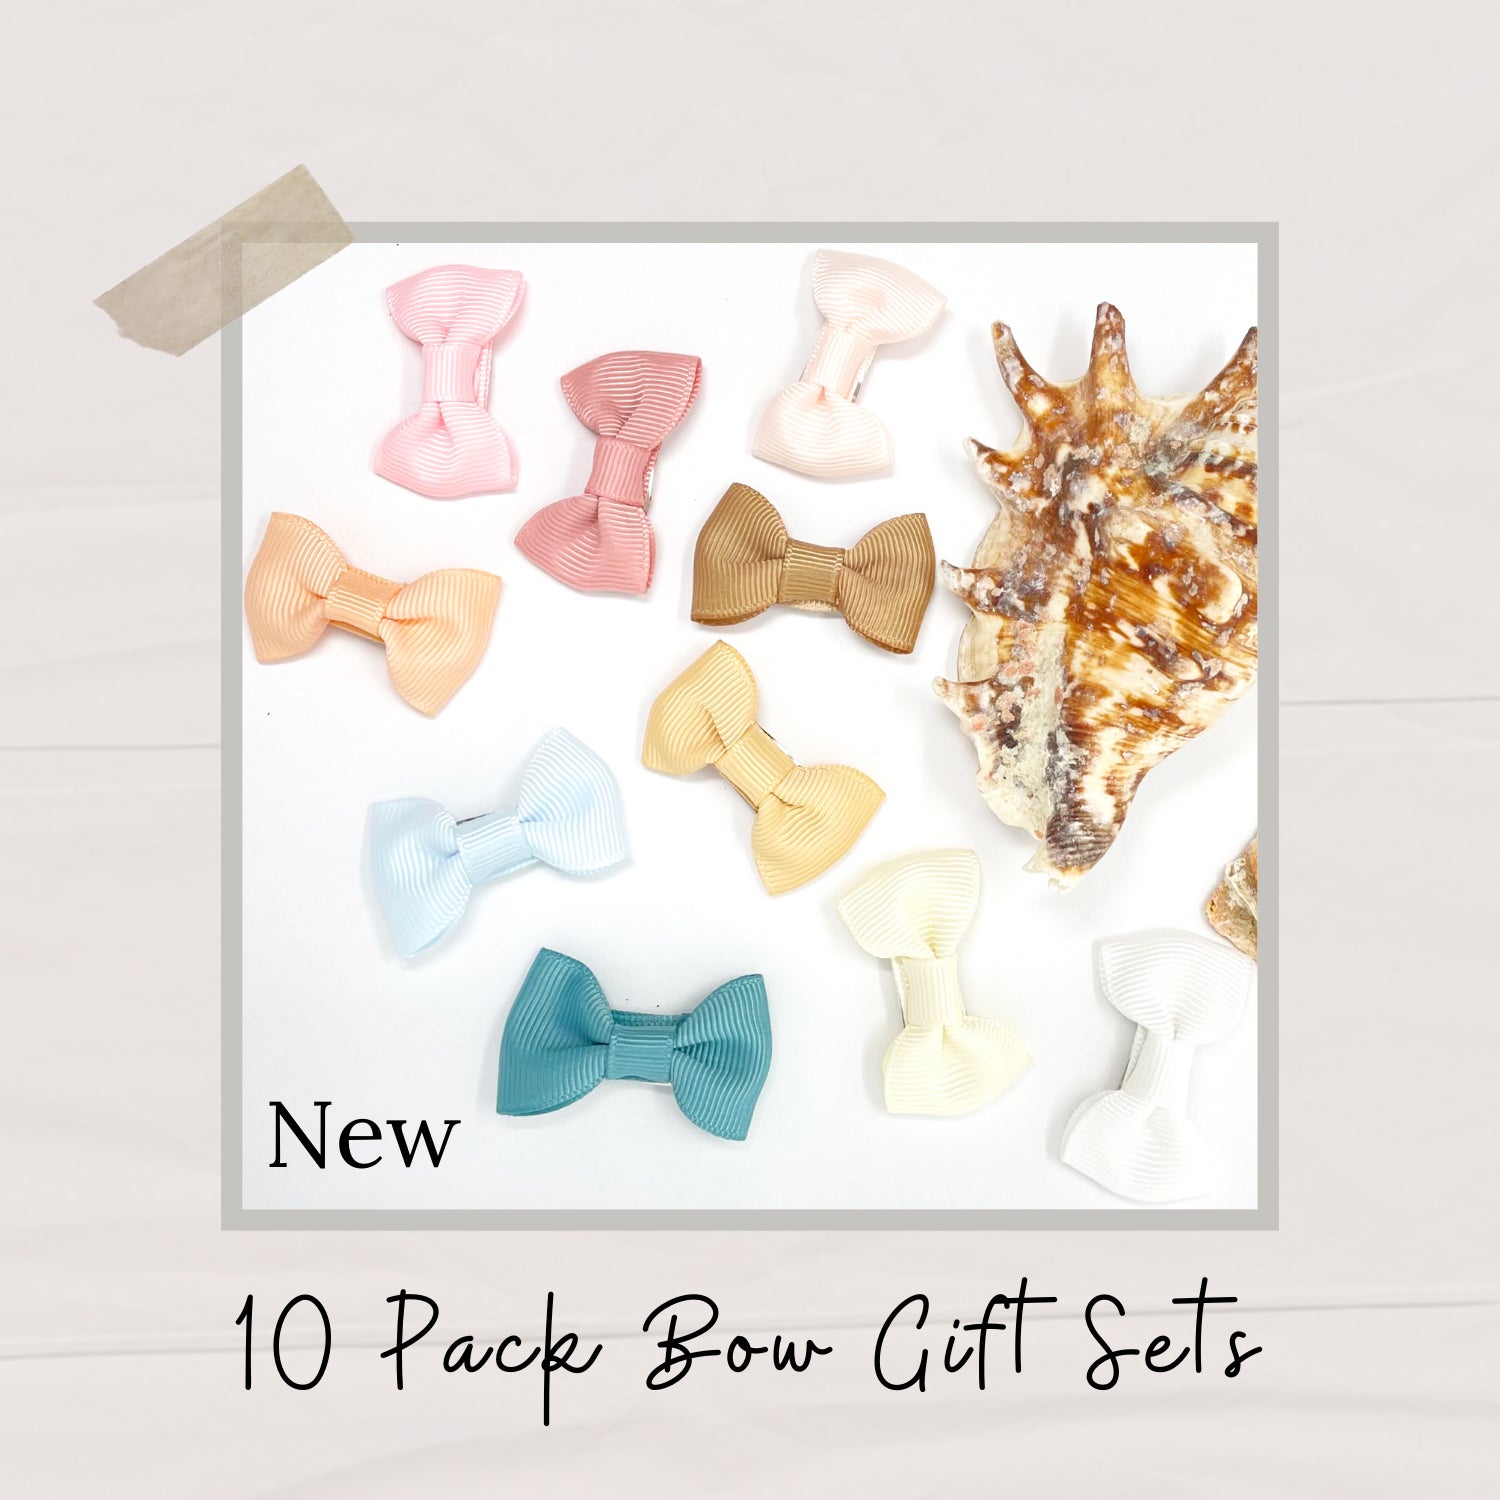 New 10-Pack Bow Gift Sets in Spring Colors